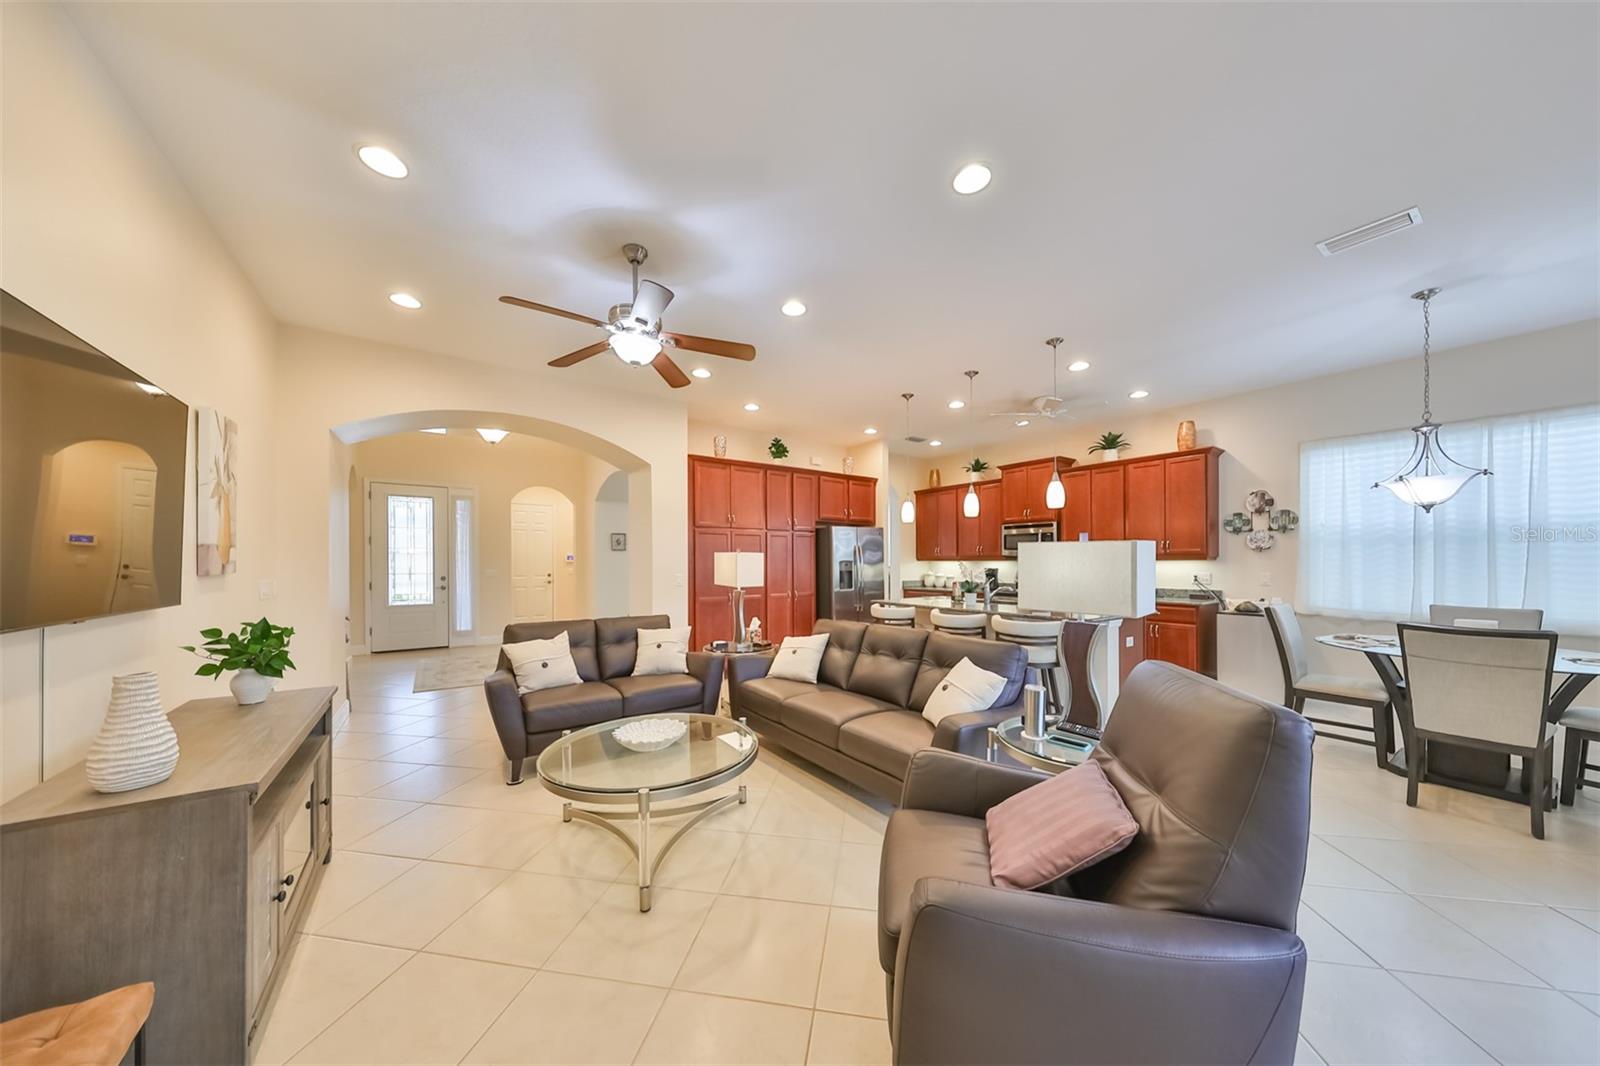 As you enter this home, you immediately walk into a bright open living space, with the guest bedroom and dining room to your immediate right and left (respectively).  Notice the high ceilings and arched doorways.